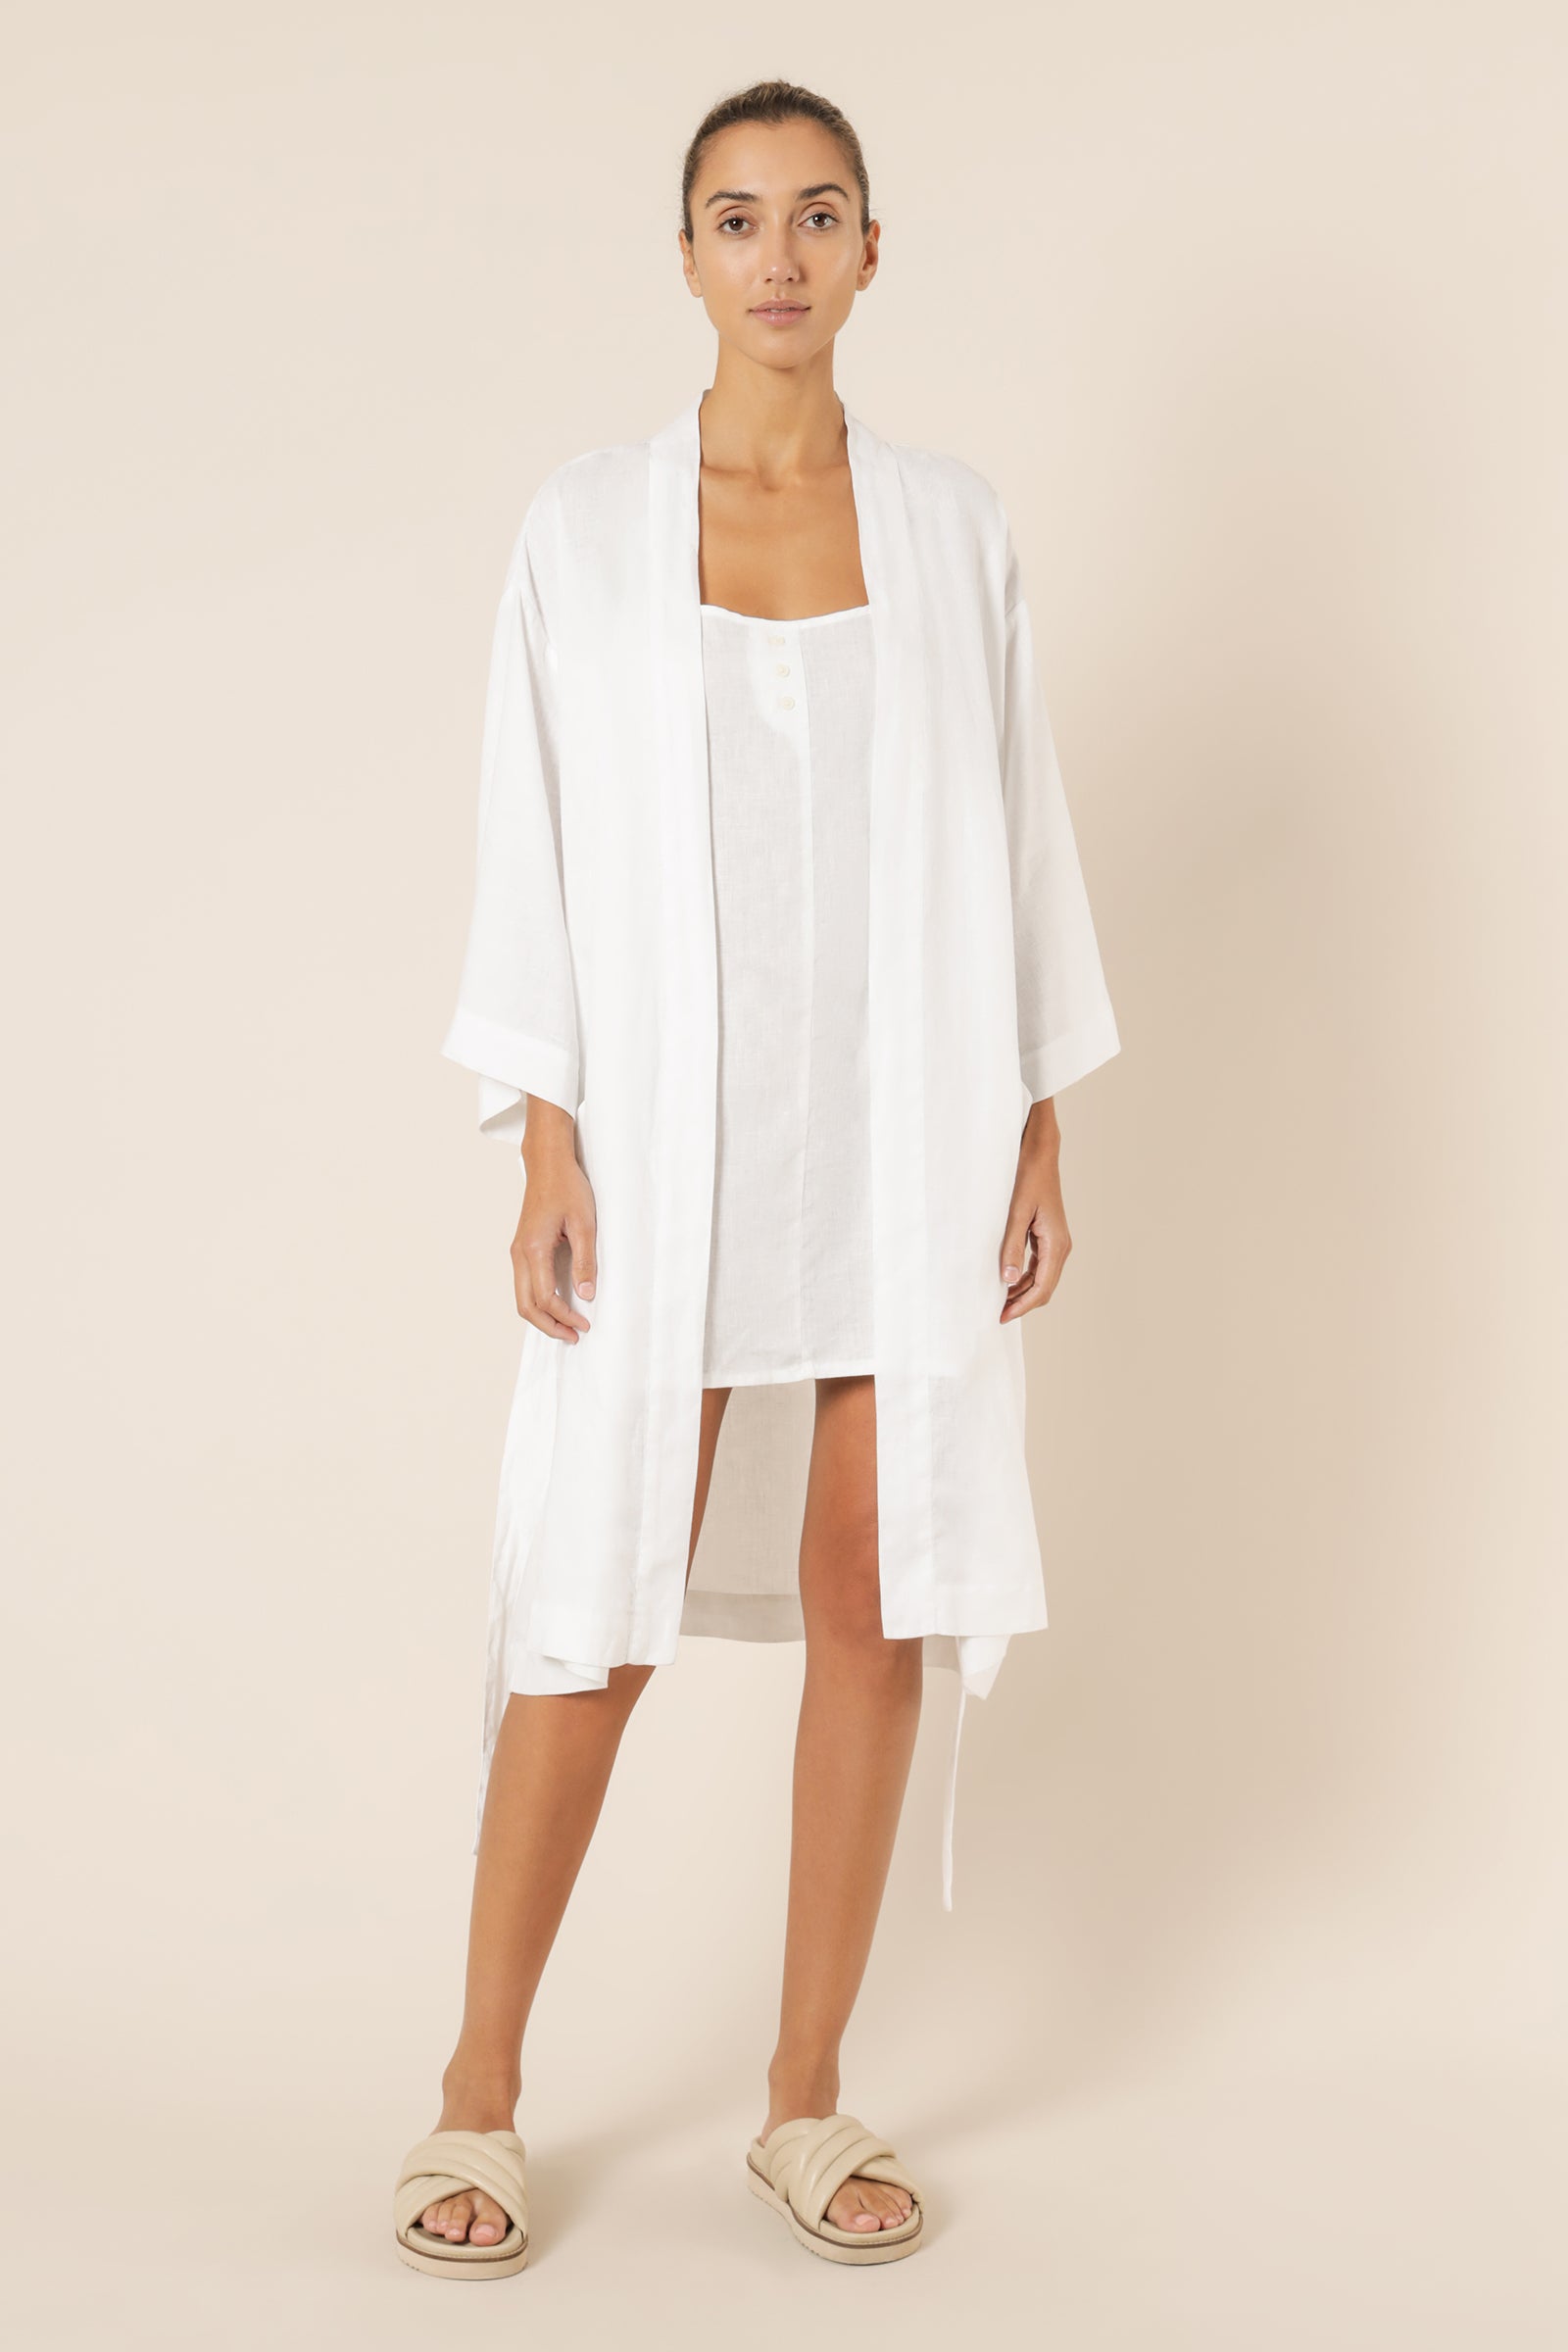 Nude Lucy nude lounge linen robe white